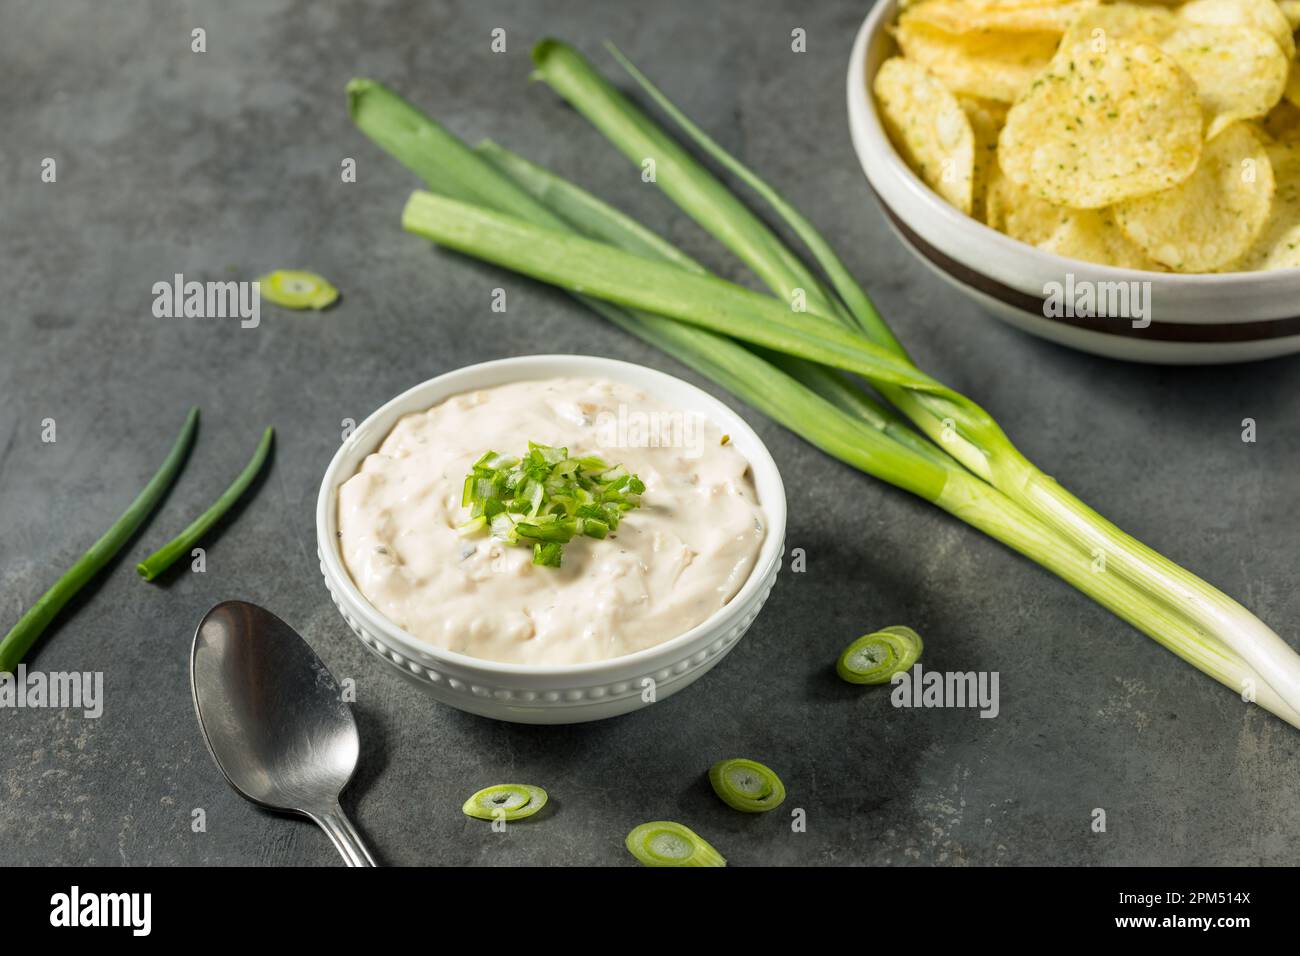 Homemade Sour Cream and Onion Dip in a Bowl Stock Photo